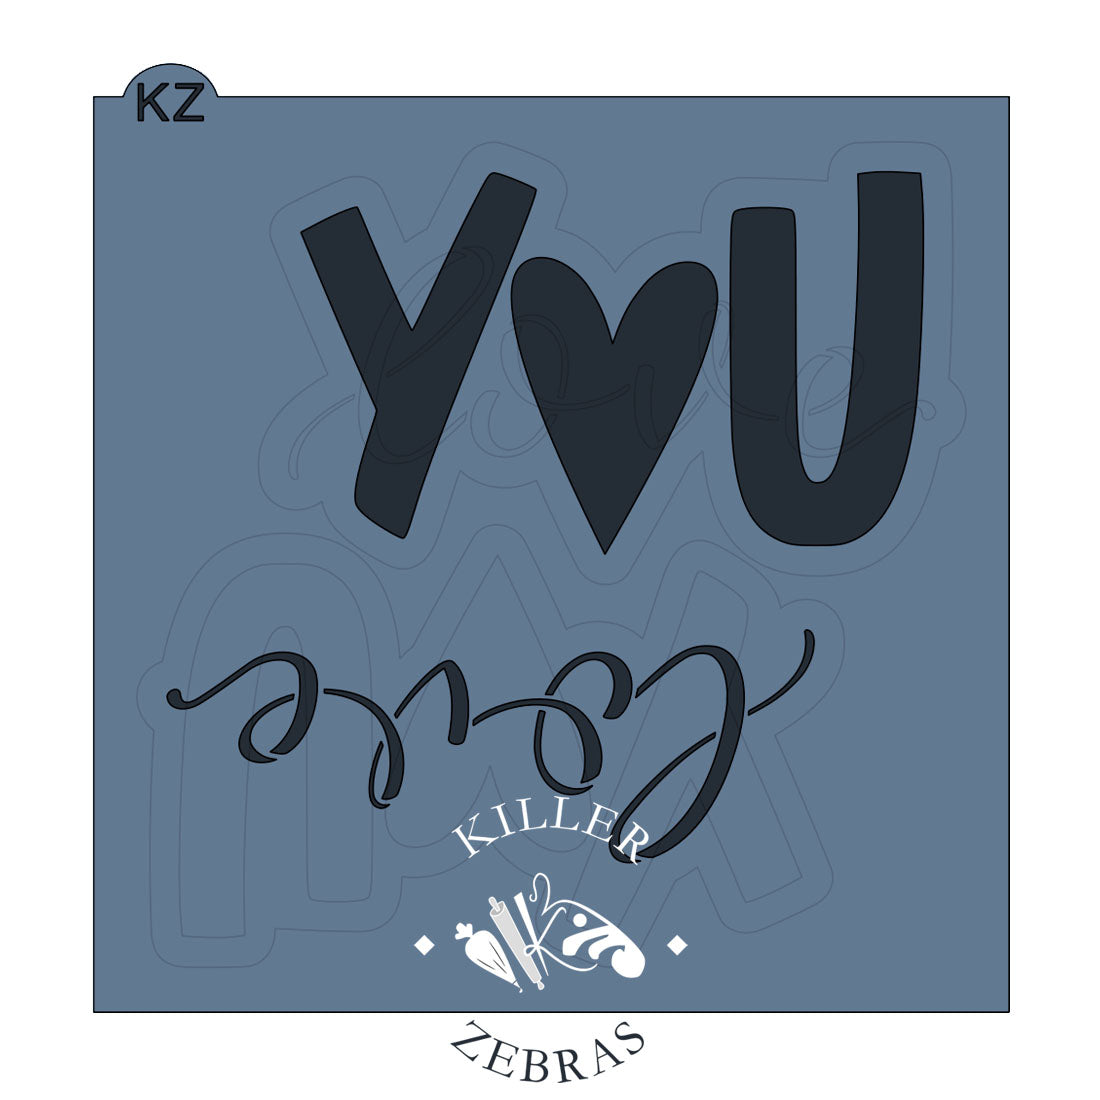 Love You (Style 2) Hand Lettered